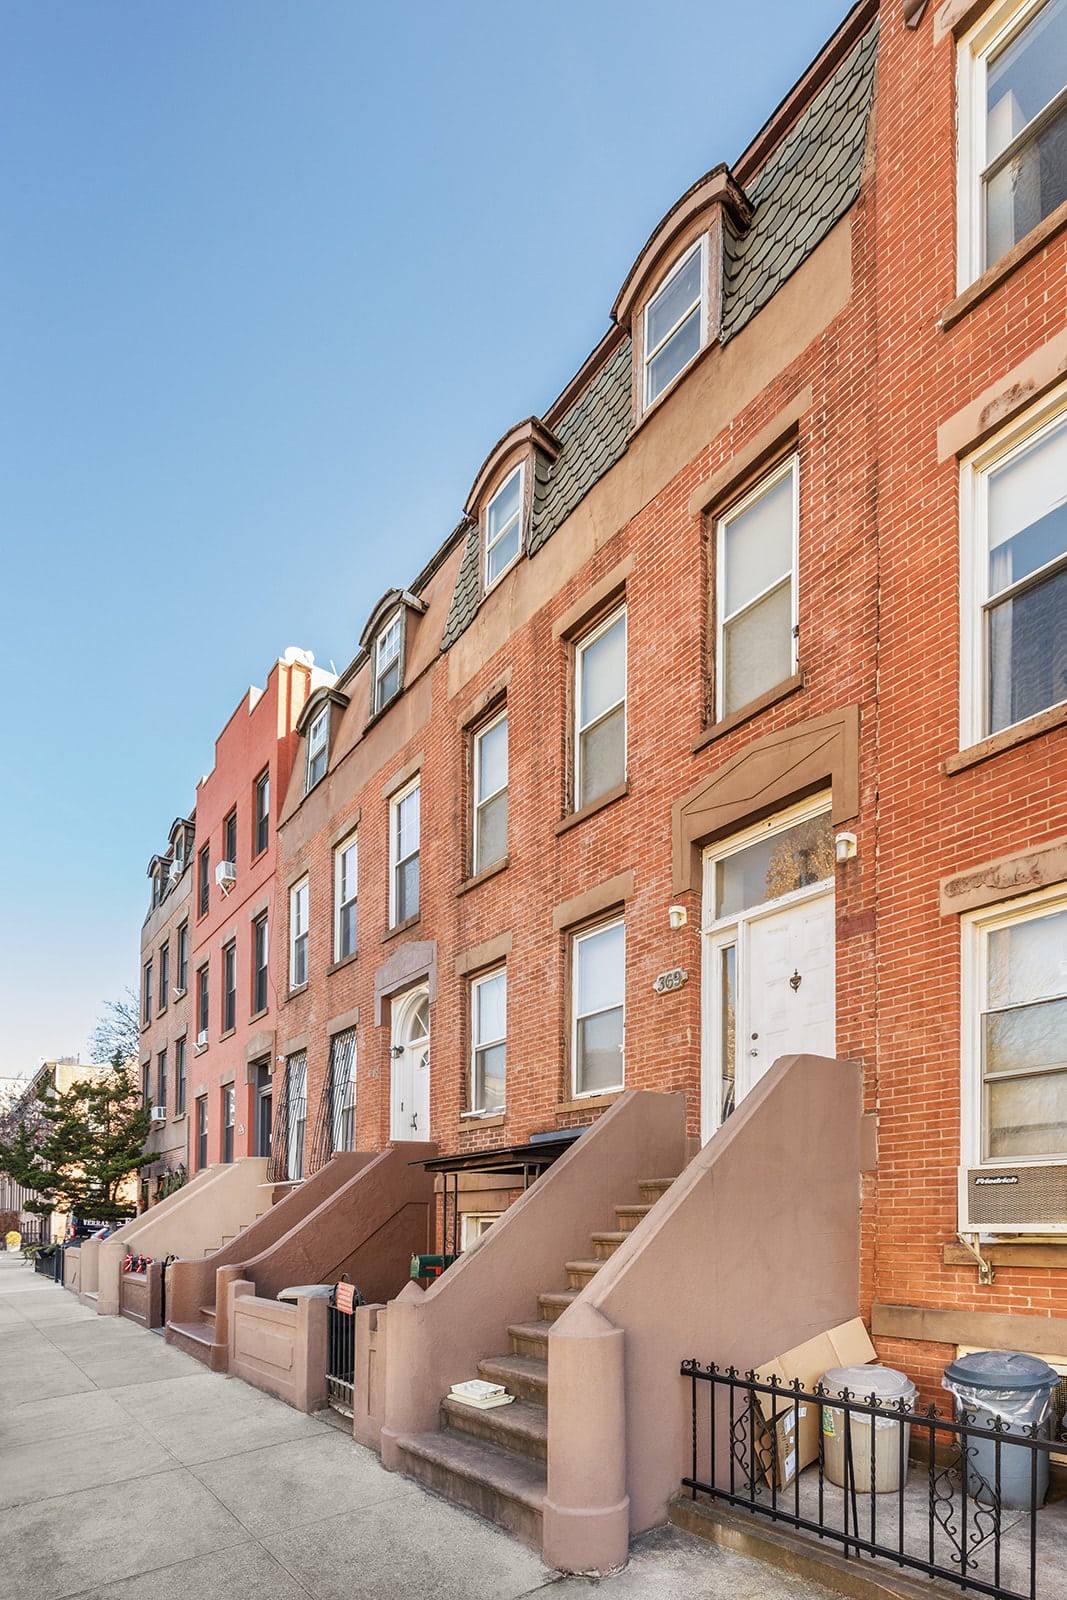 3 Family Townhouse in Carroll Gardens